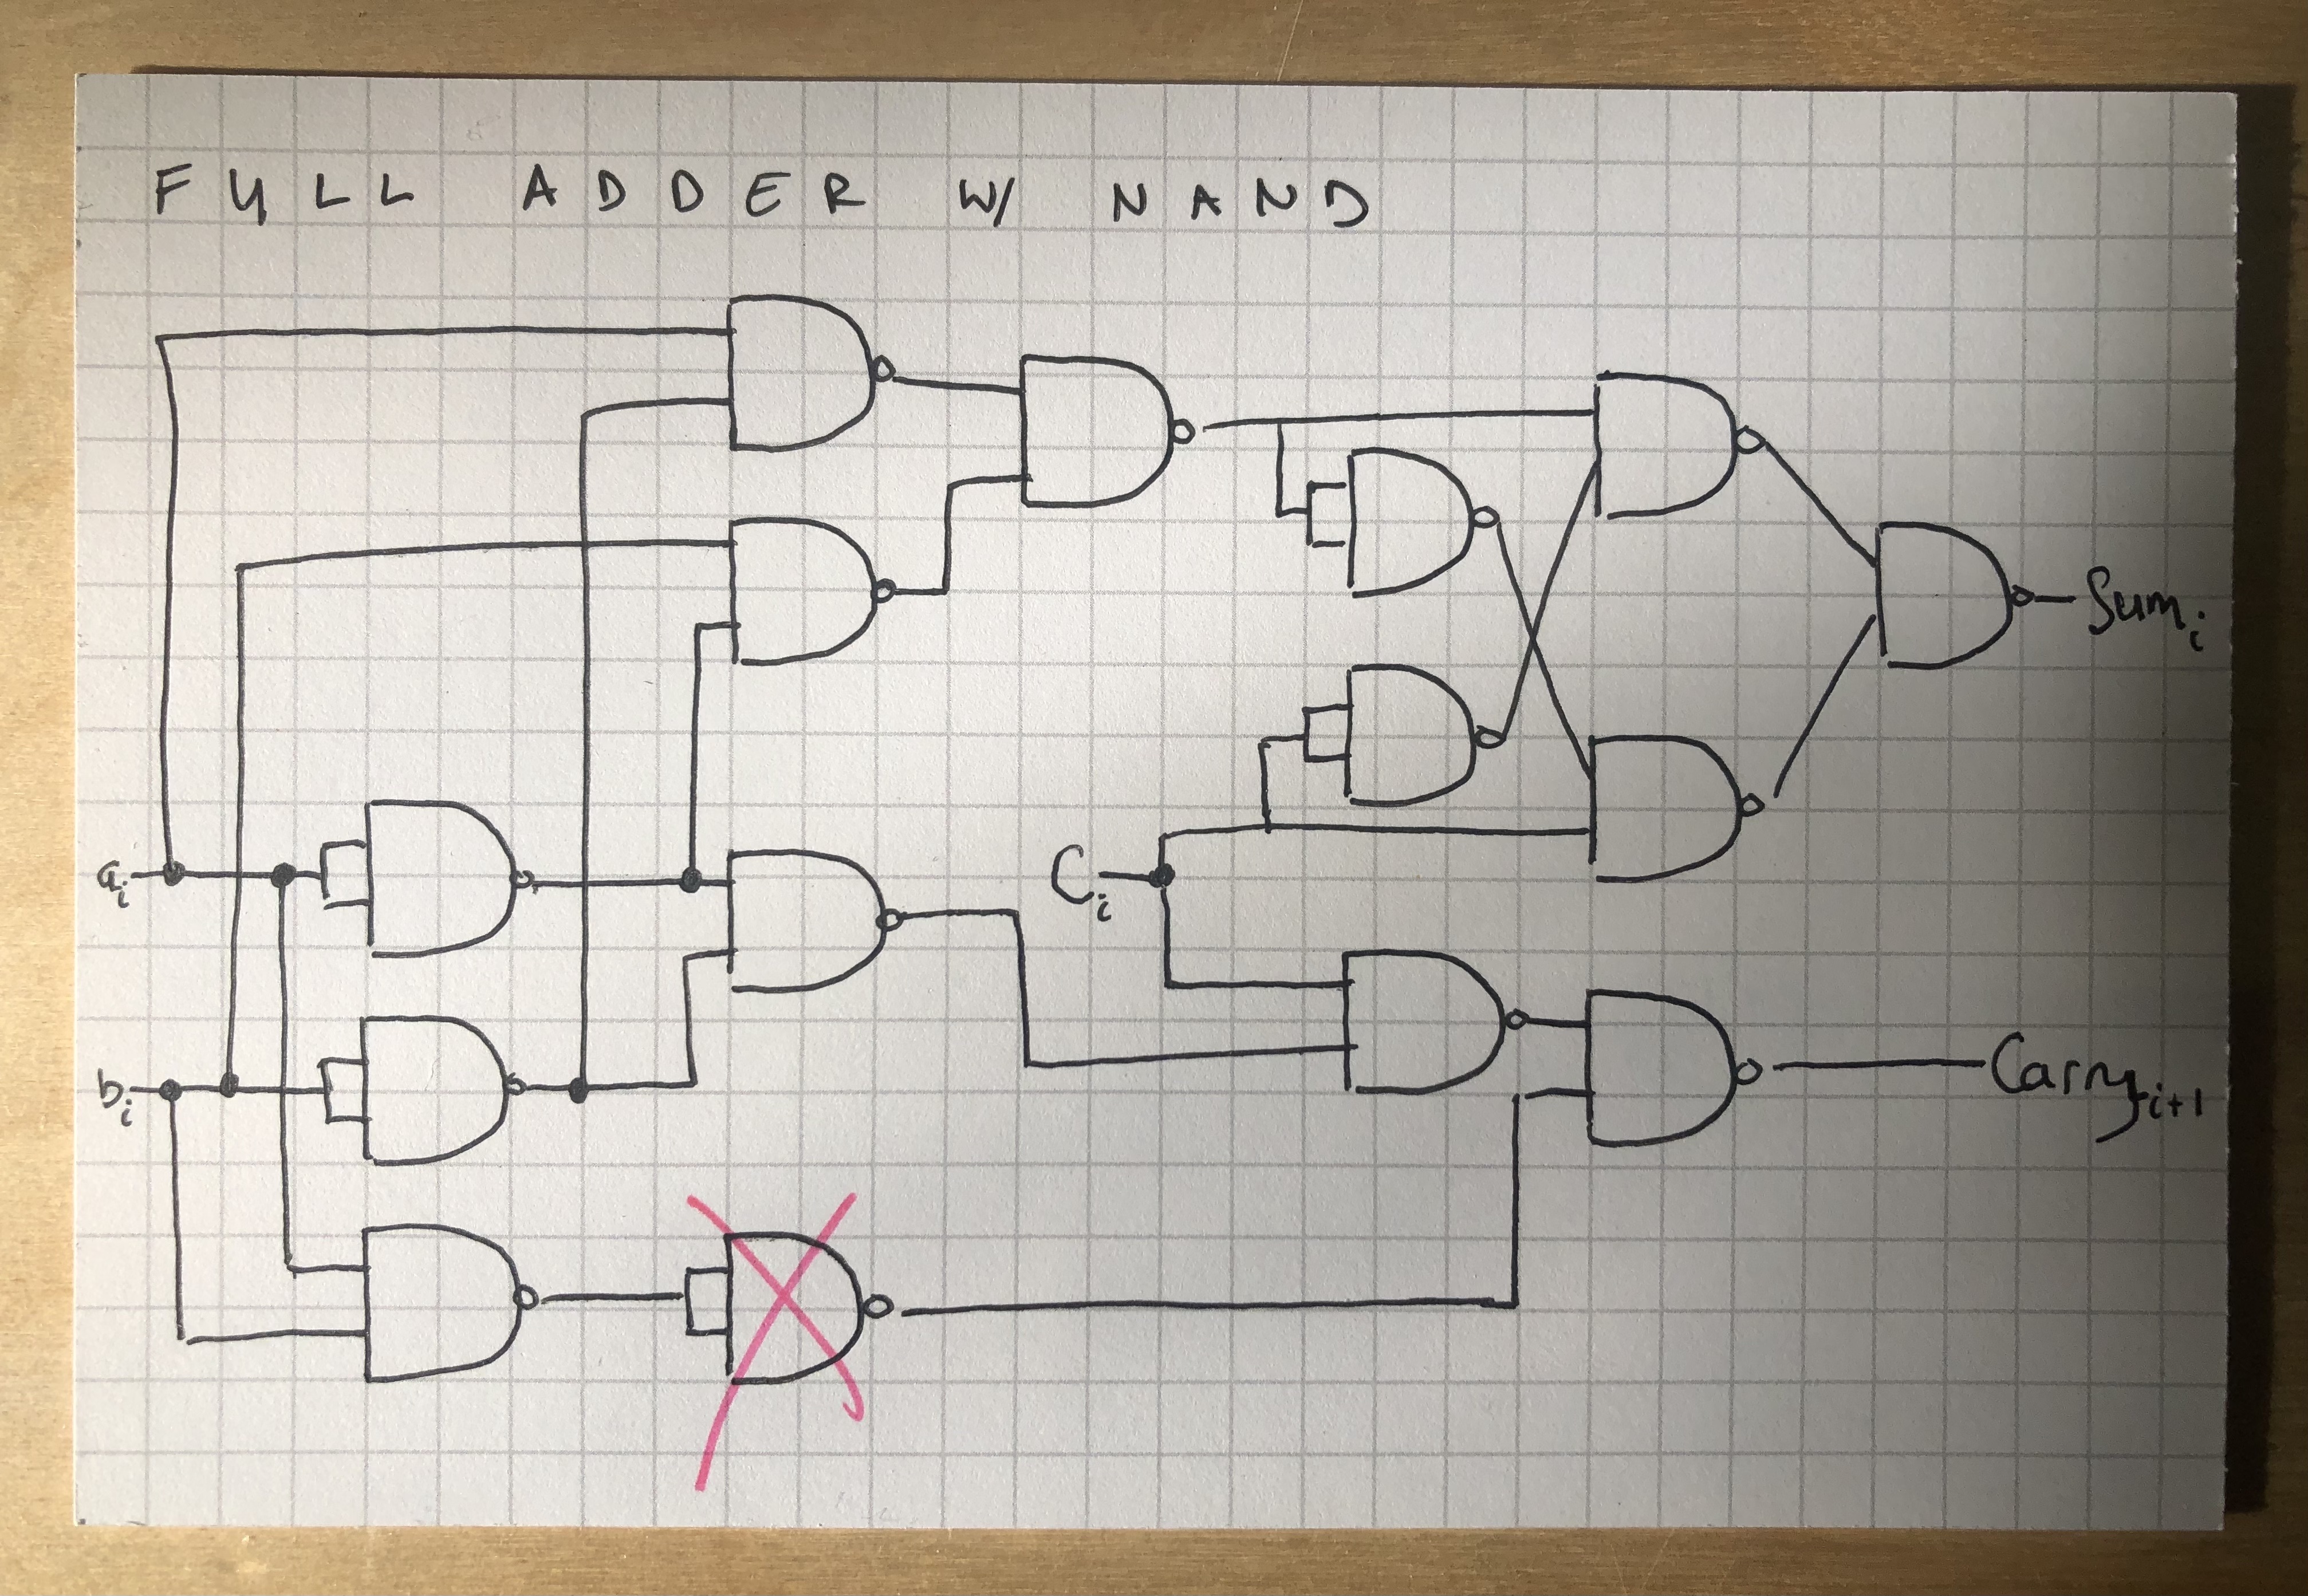 Adder Schematic with NAND only, corrected